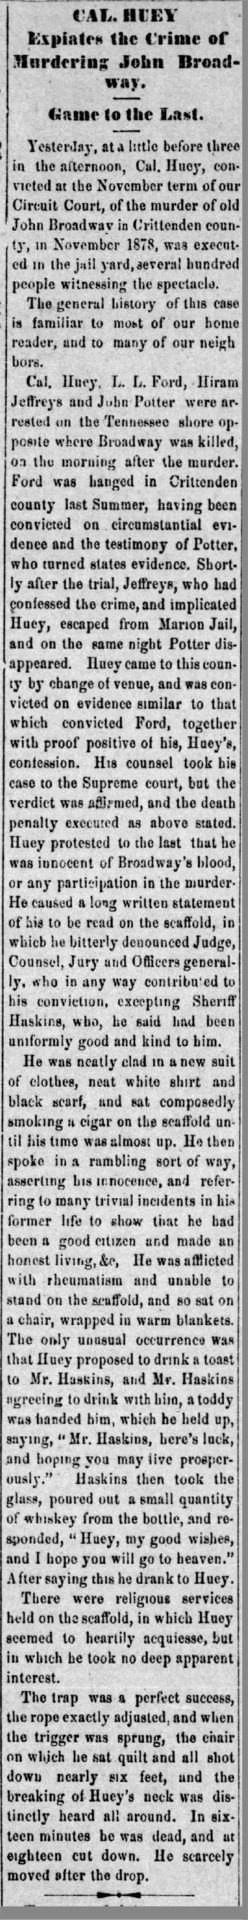 "Cal Huey Expiates the Crime of Murdering John Broadway" newspaper clipping